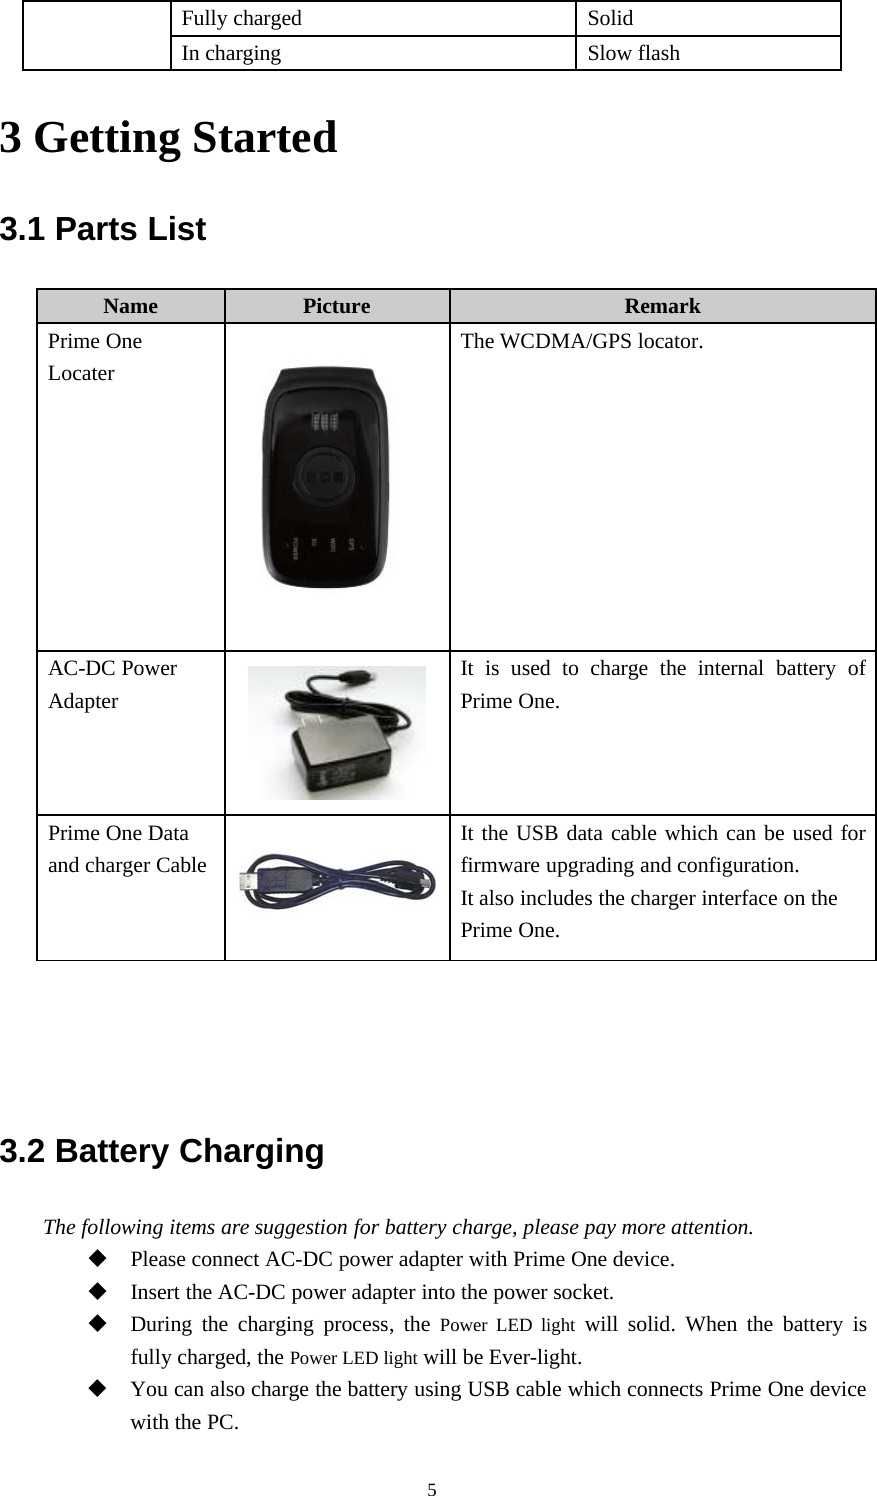 5Fully charged SolidIn charging Slow flash3 Getting Started3.1 Parts ListName Picture RemarkPrime OneLocaterThe WCDMA/GPS locator.AC-DC PowerAdapterIt is used to charge the internal battery ofPrime One.Prime One Dataand charger CableIt the USB data cable which can be used forfirmware upgrading and configuration.It also includes the charger interface on thePrime One.3.2 Battery ChargingThe following items are suggestion for battery charge, please pay more attention.Please connect AC-DC power adapter with Prime One device.Insert the AC-DC power adapter into the power socket.During the charging process, the Power LED light will solid. When the battery isfully charged, the Power LED light will be Ever-light.You can also charge the battery using USB cable which connects Prime One devicewith the PC.